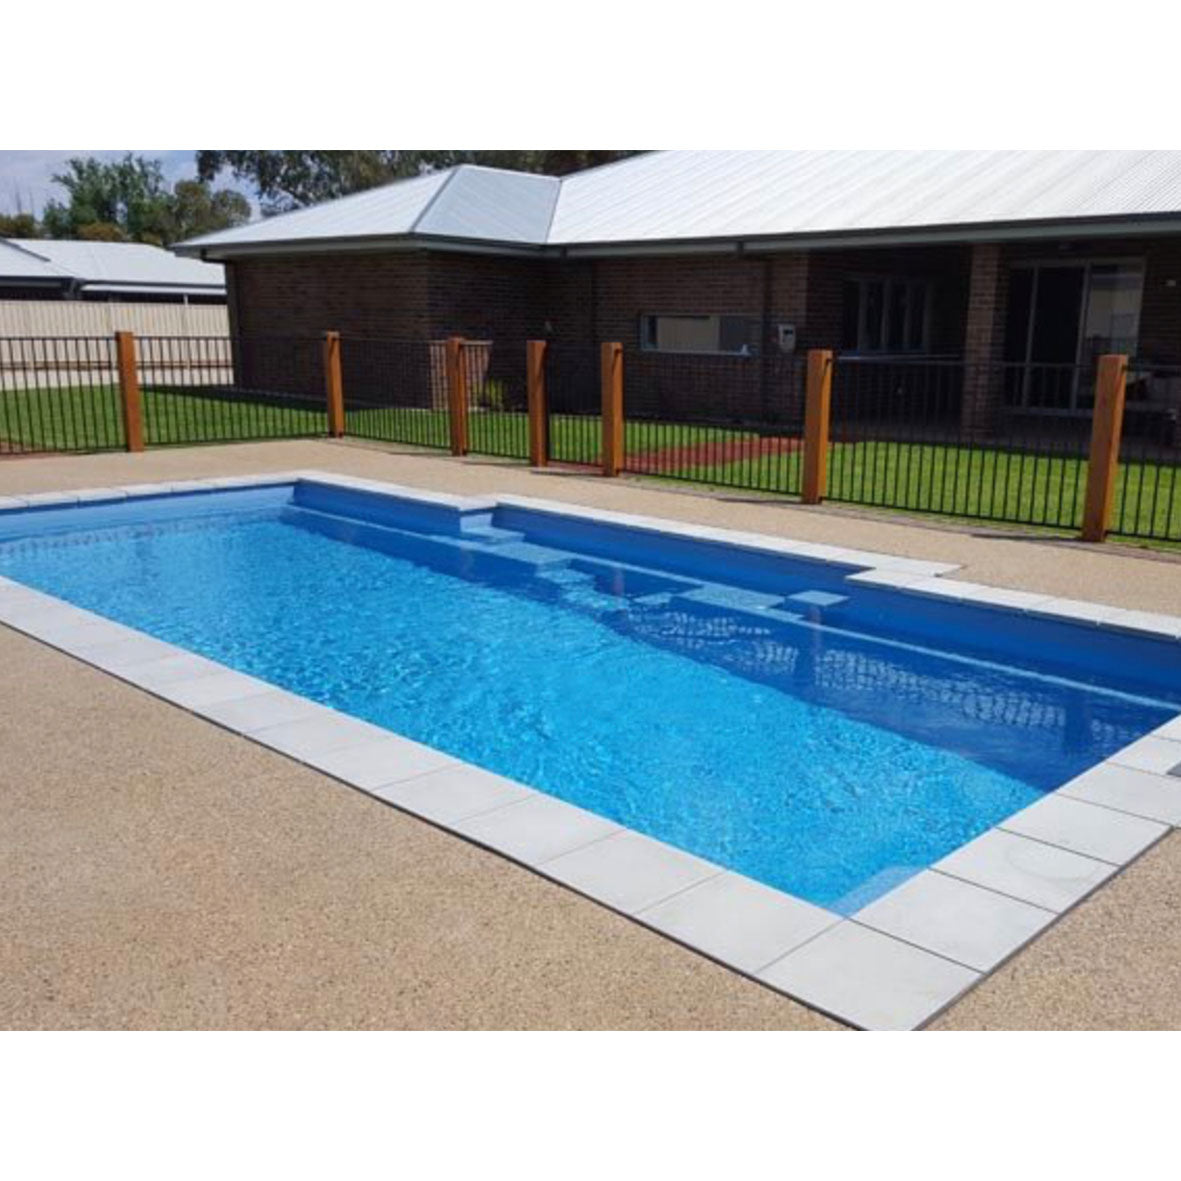 Conquest Pools Albury Wodonga fibreglass swimming pool colour range.  See colour sample for fibreglass colour. See finished swimming pool example to watch the amazing swimming pool colour come to life.  Be sure to contact Conquest Pools Albury Wodonga your true one stop swimming pool company offering swimming pool installation, blankets, heating, chemicals, umbrellas, servicing and maintenance